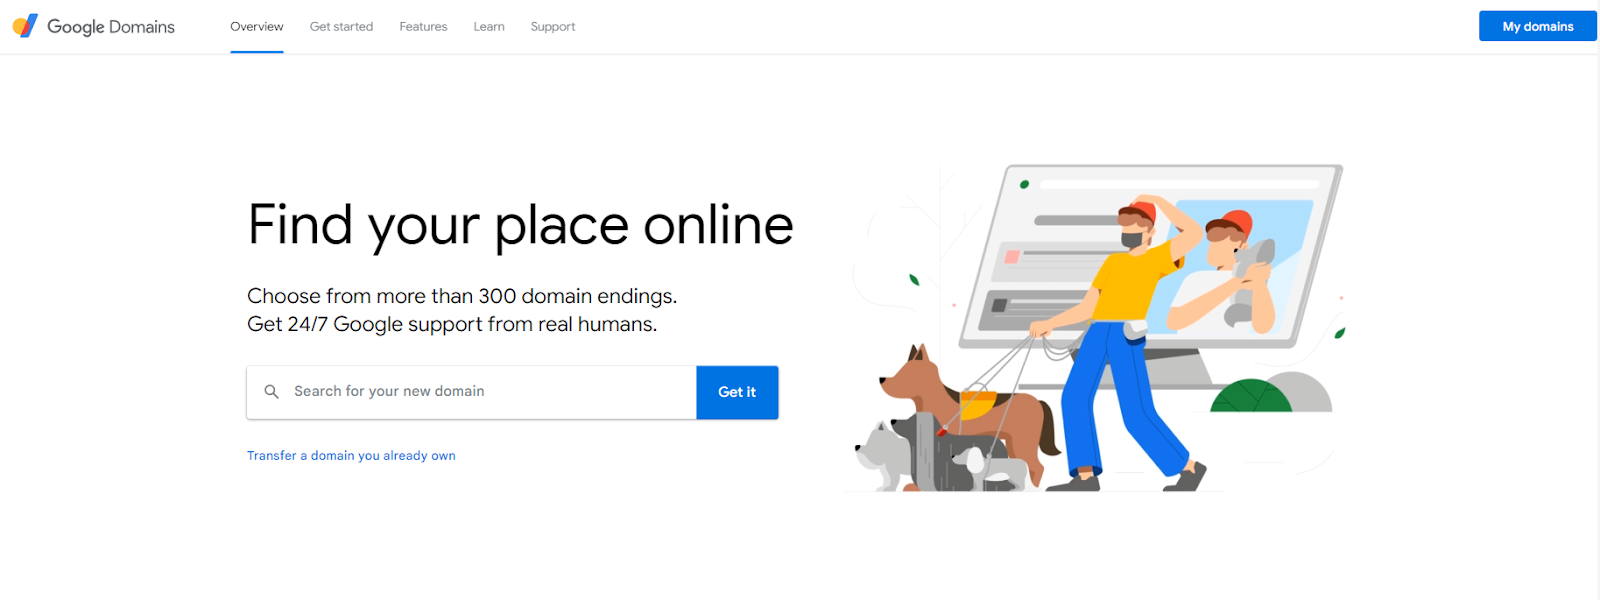 Google Domains - DSers